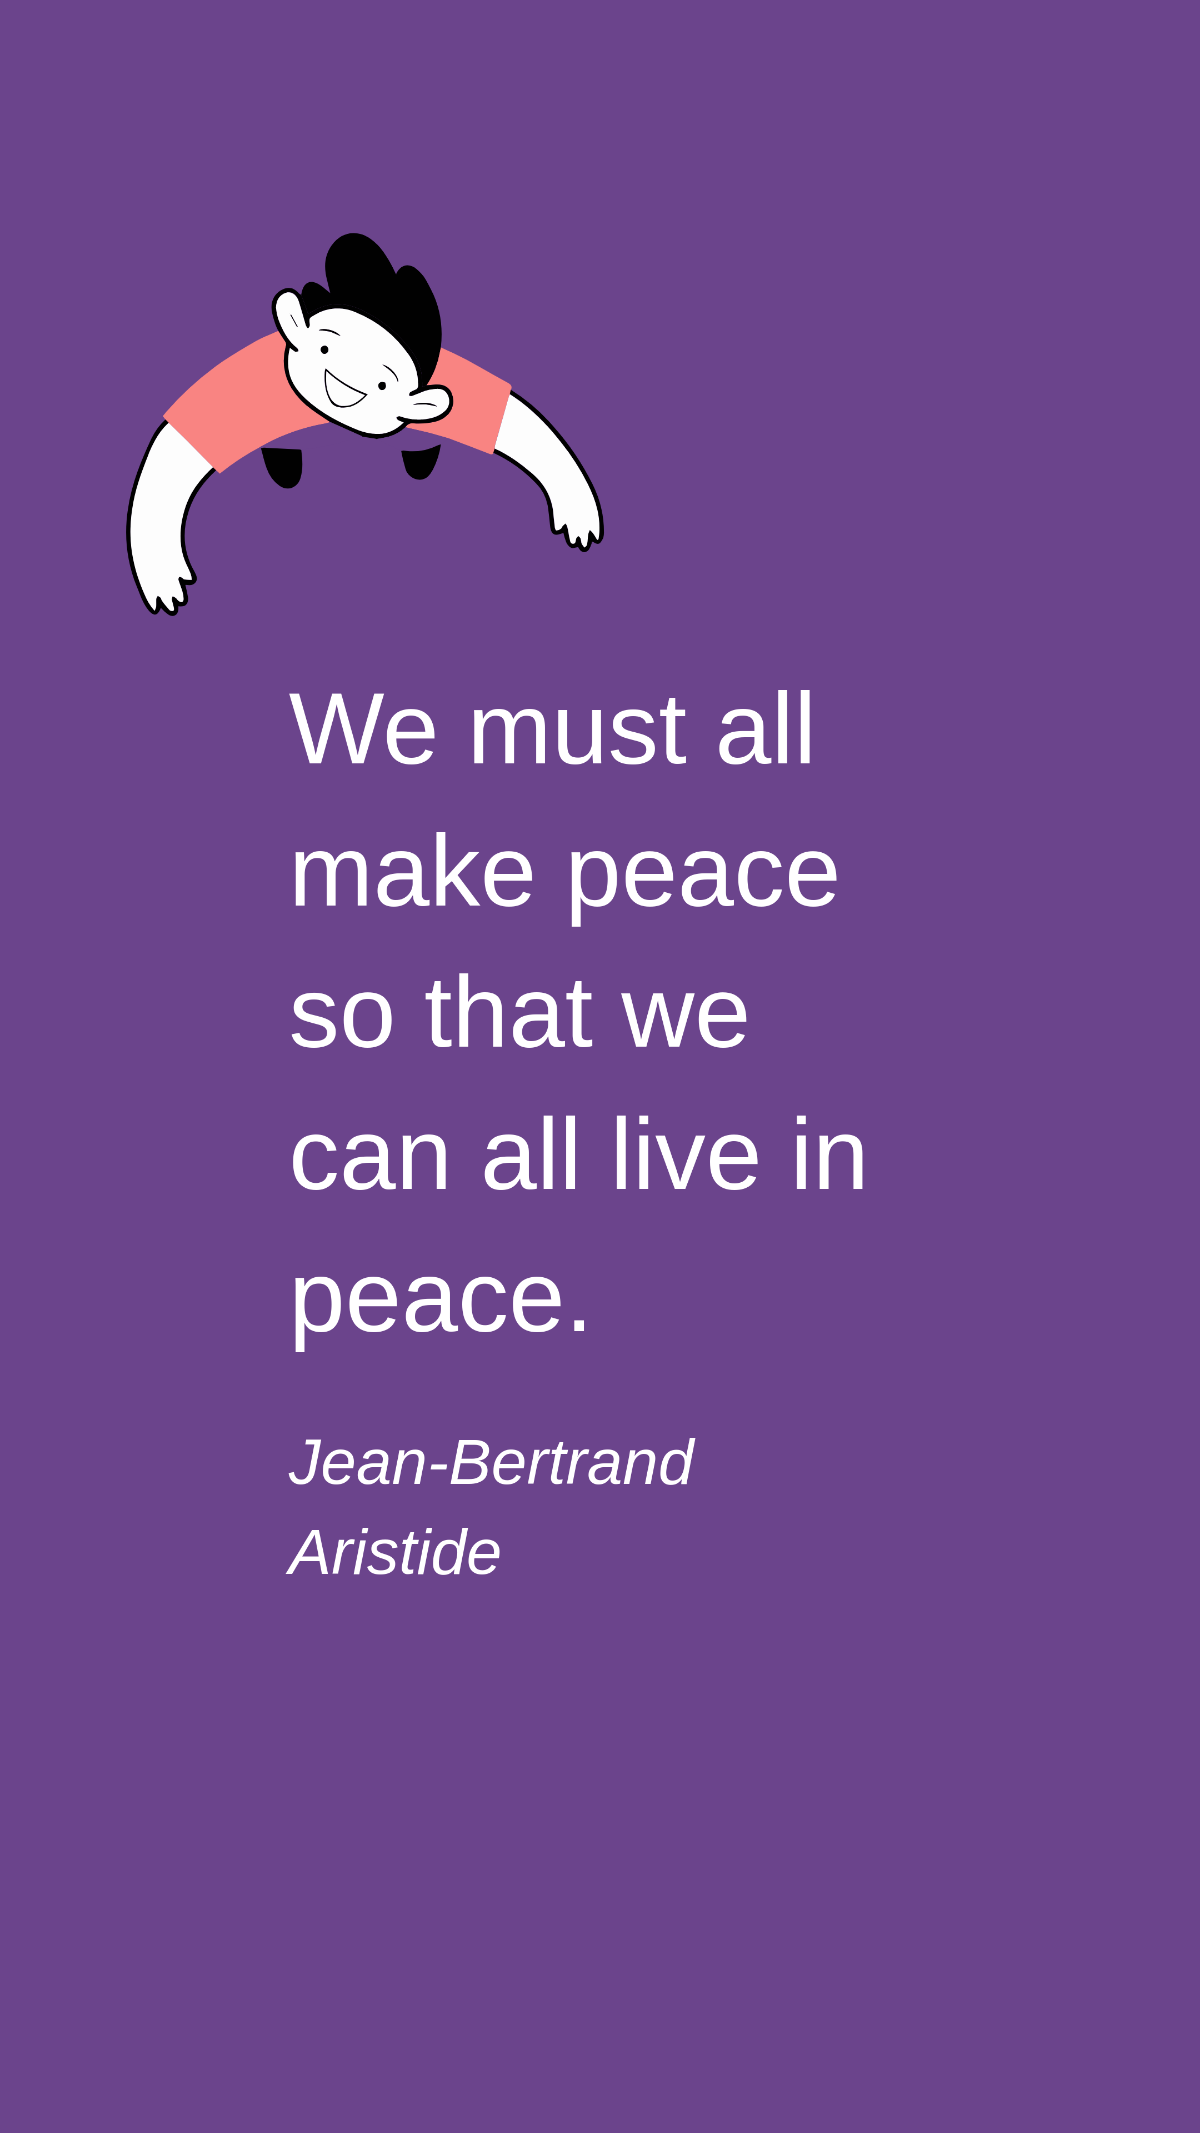 Free Jean-Bertrand Aristide - We must all make peace so that we can all live in peace. Template